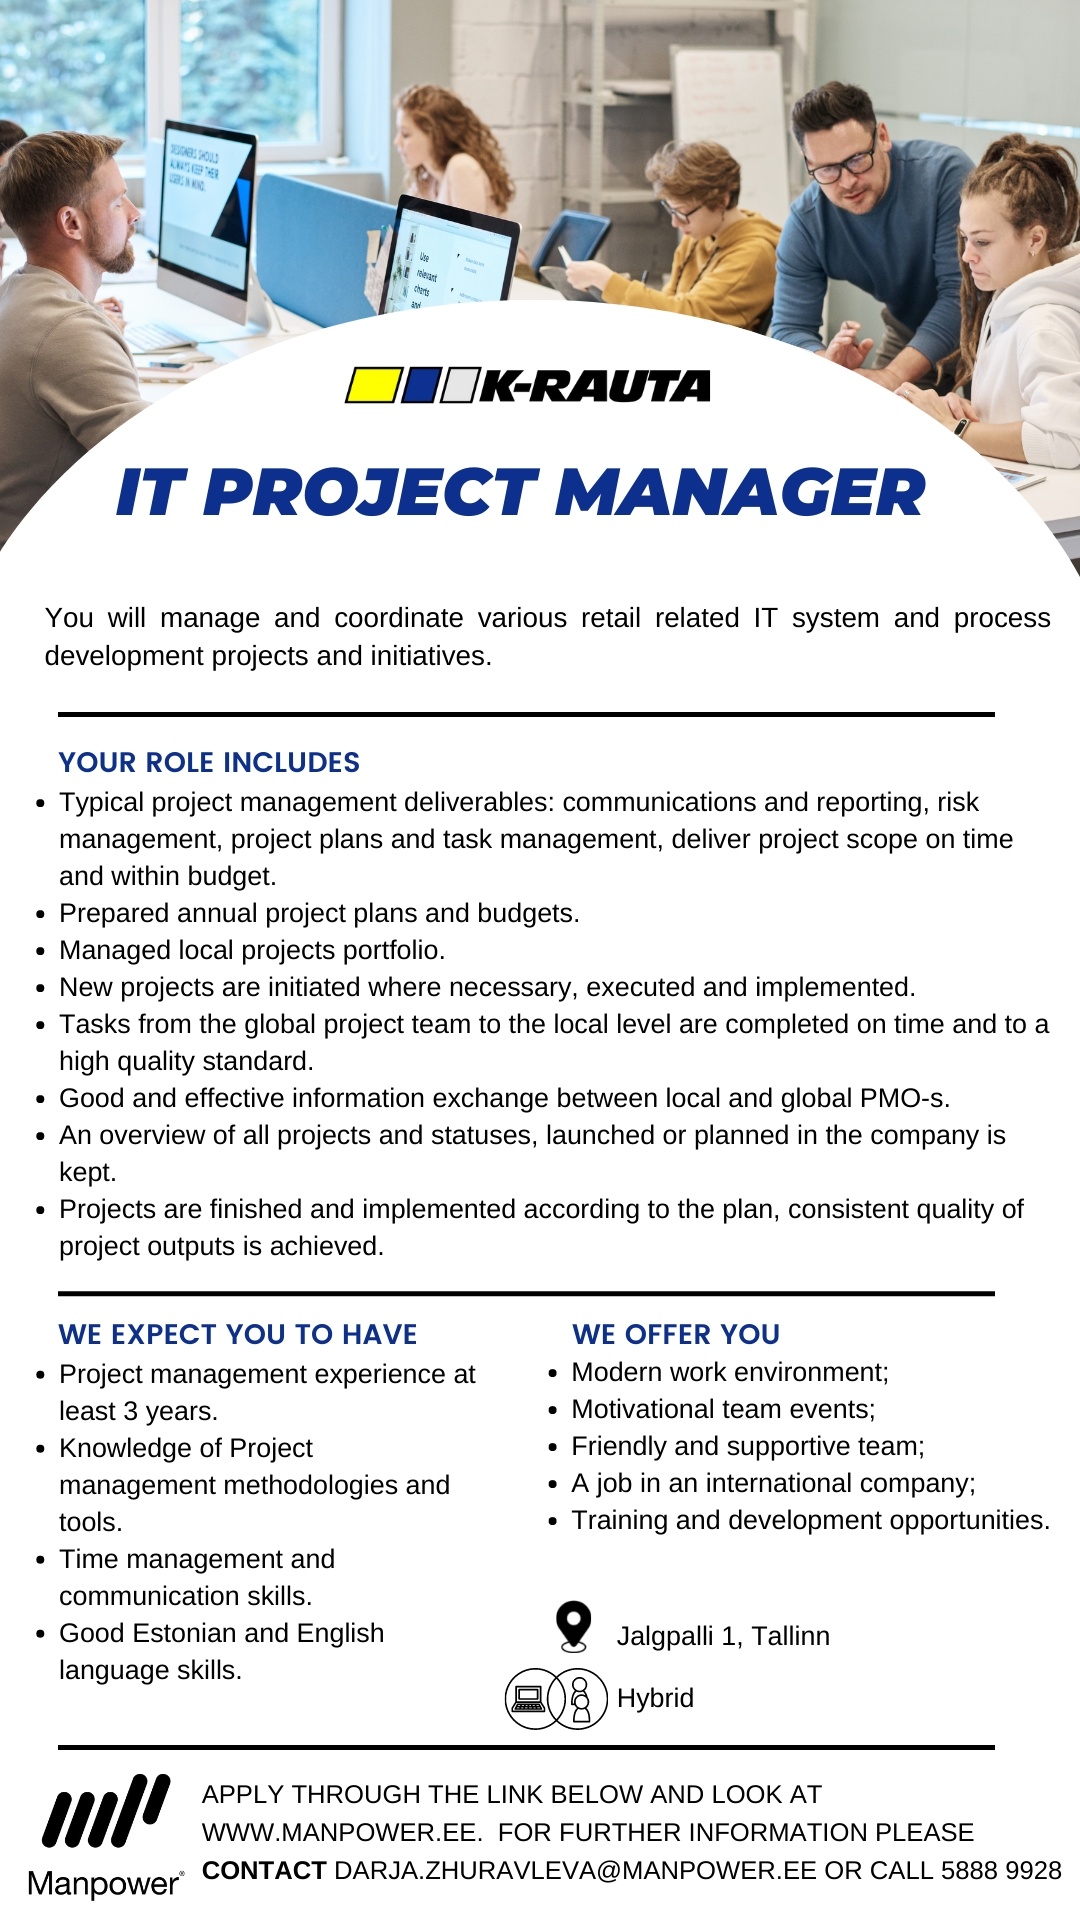 Manpower OÜ IT PROJECT MANAGER